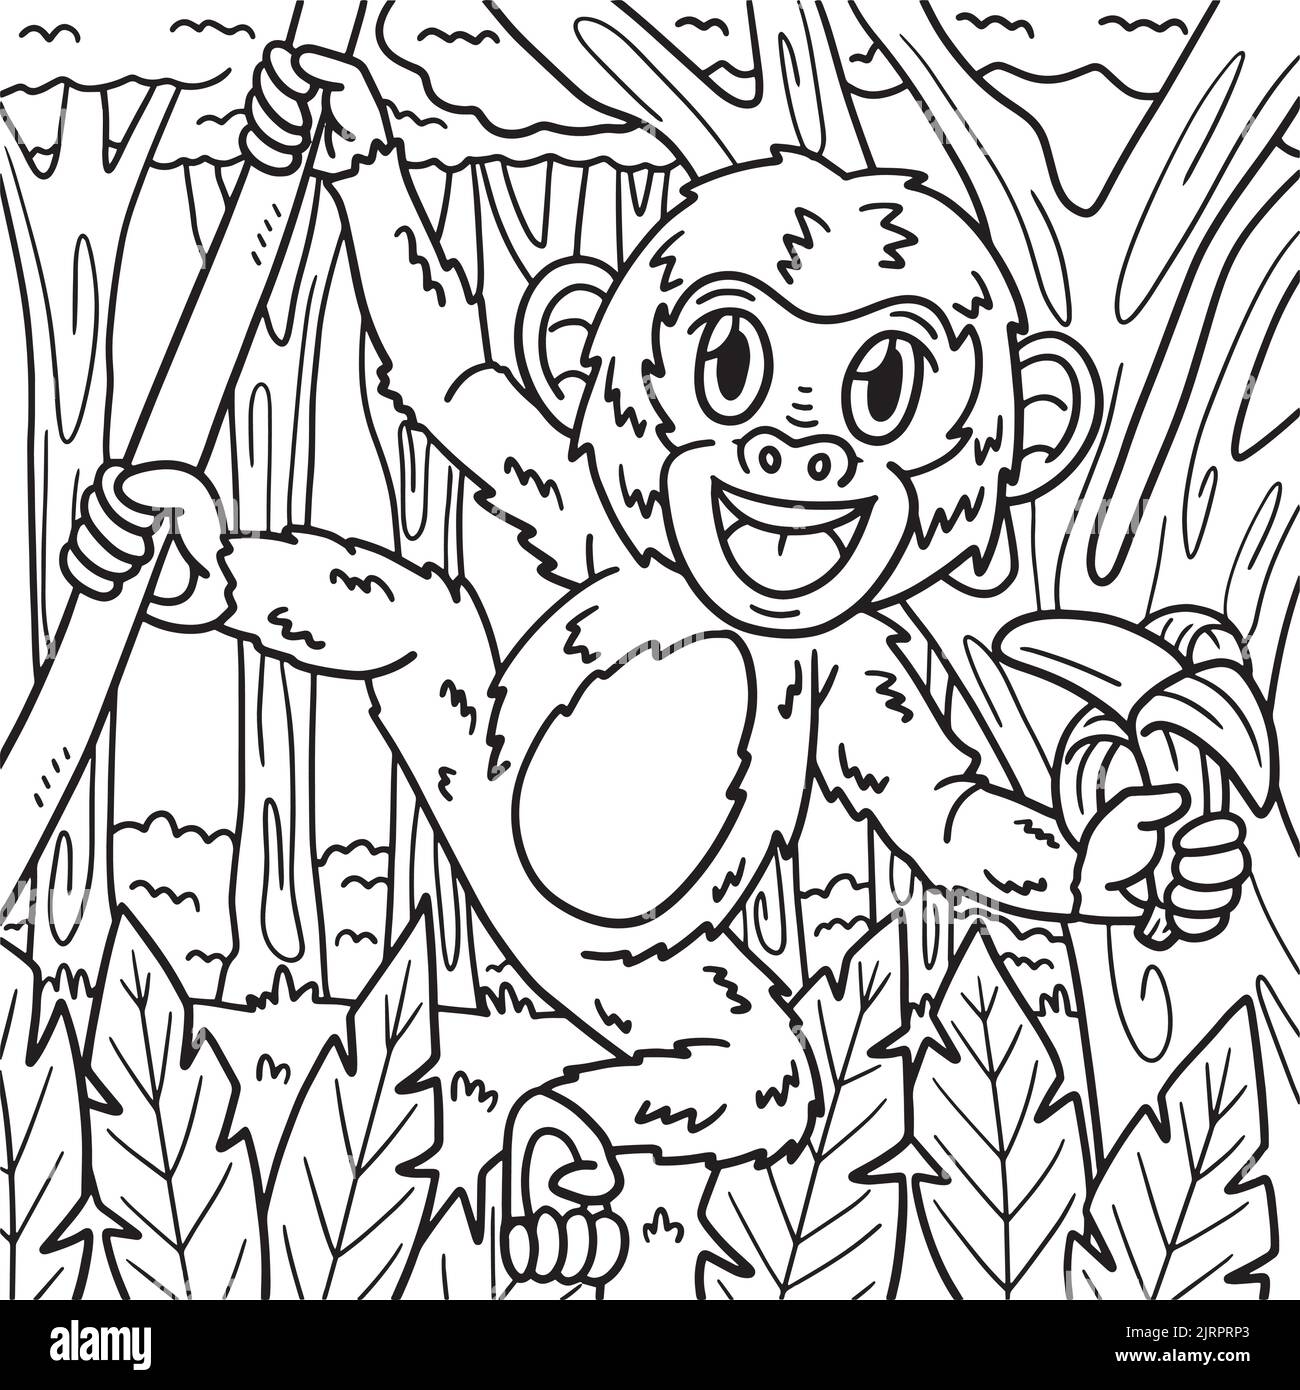 Monkey Animal Coloring Page for Kids Stock Vector Image & Art - Alamy